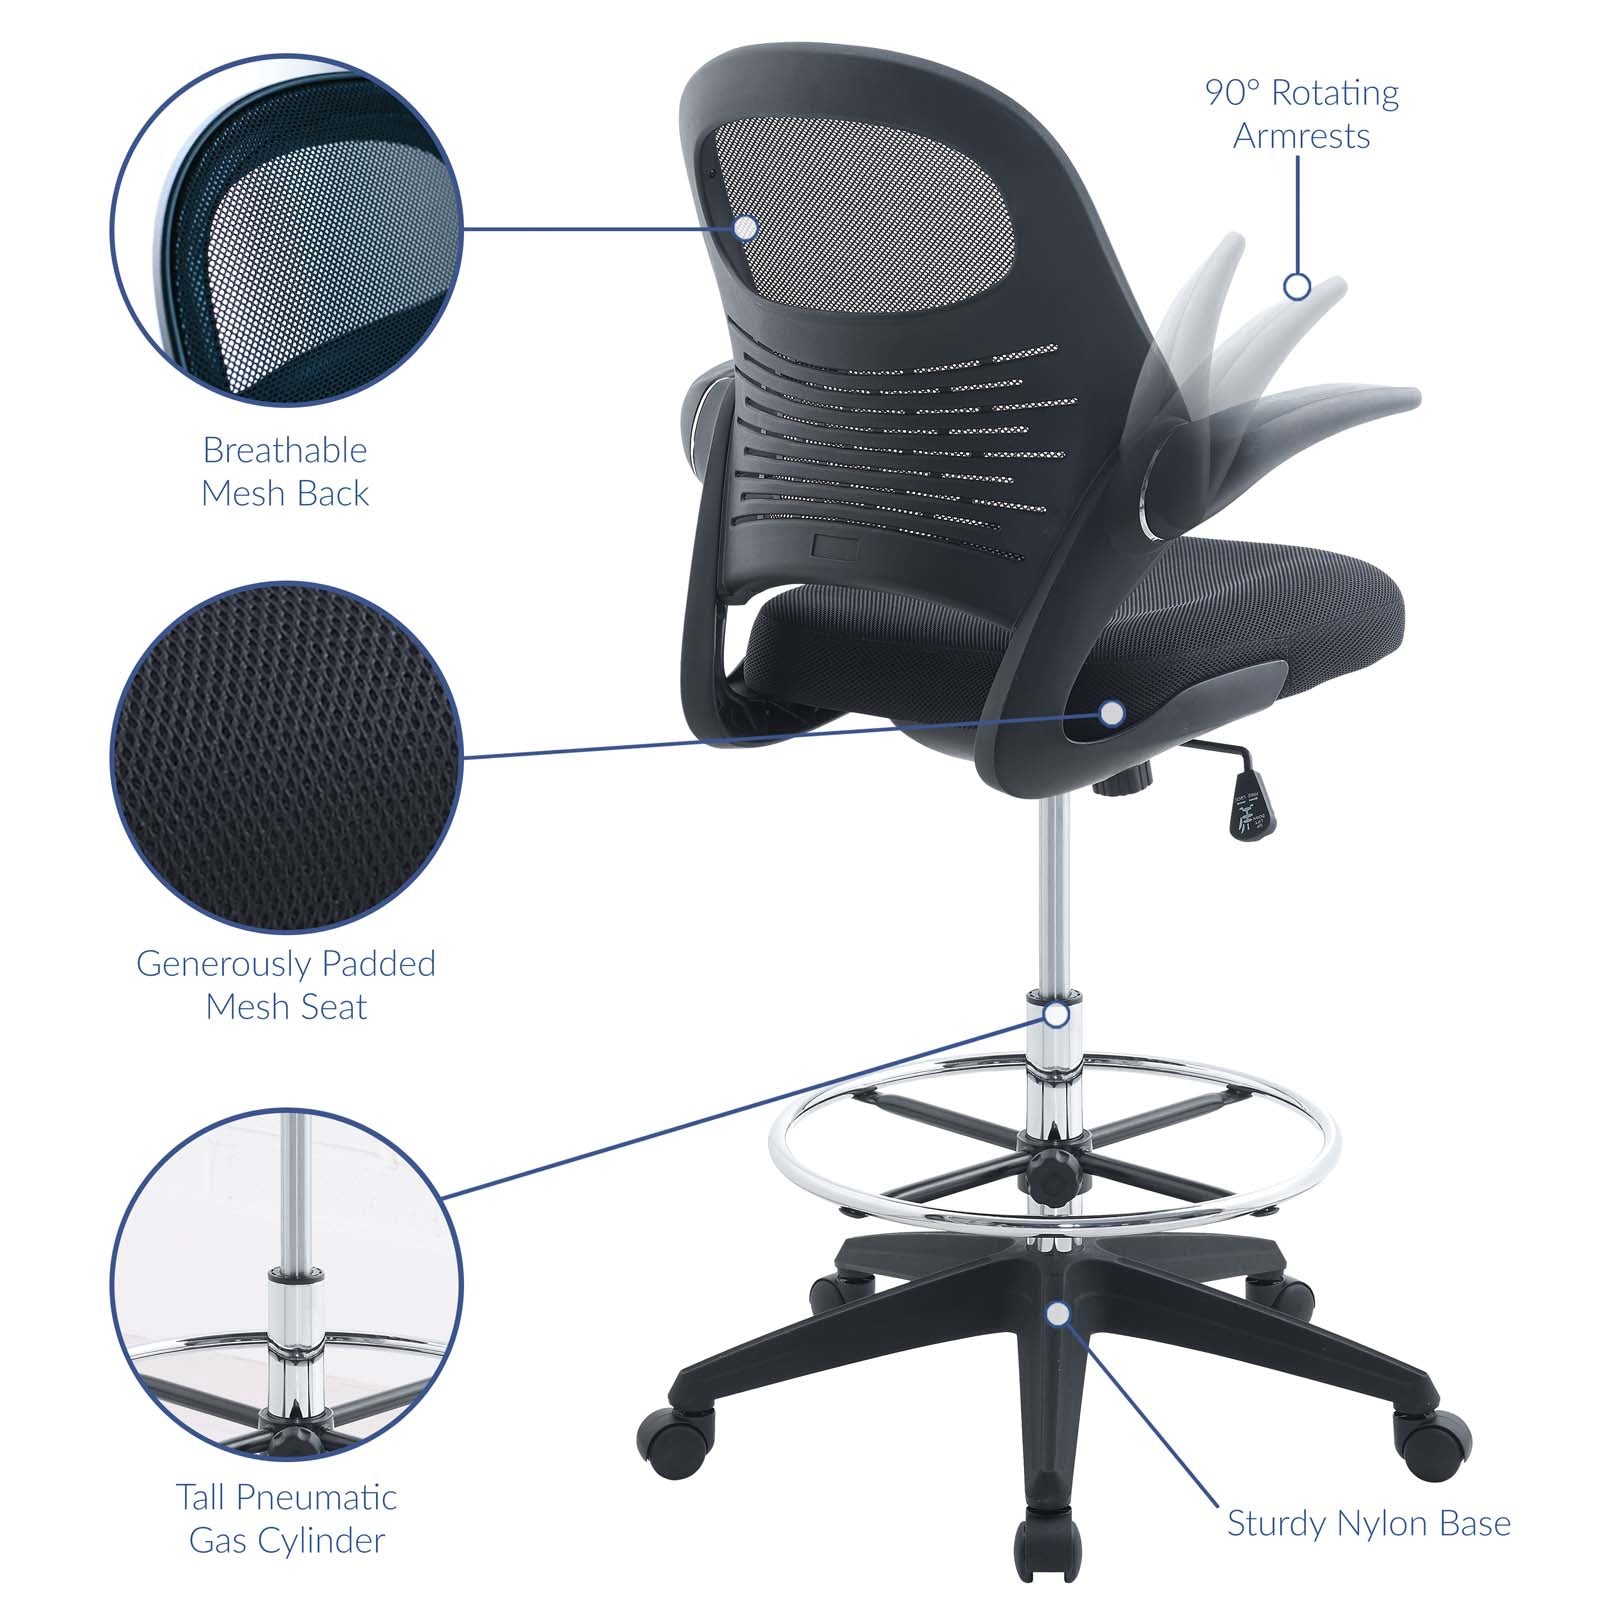 Modway Task Chairs - Stealth Drafting Chair Black